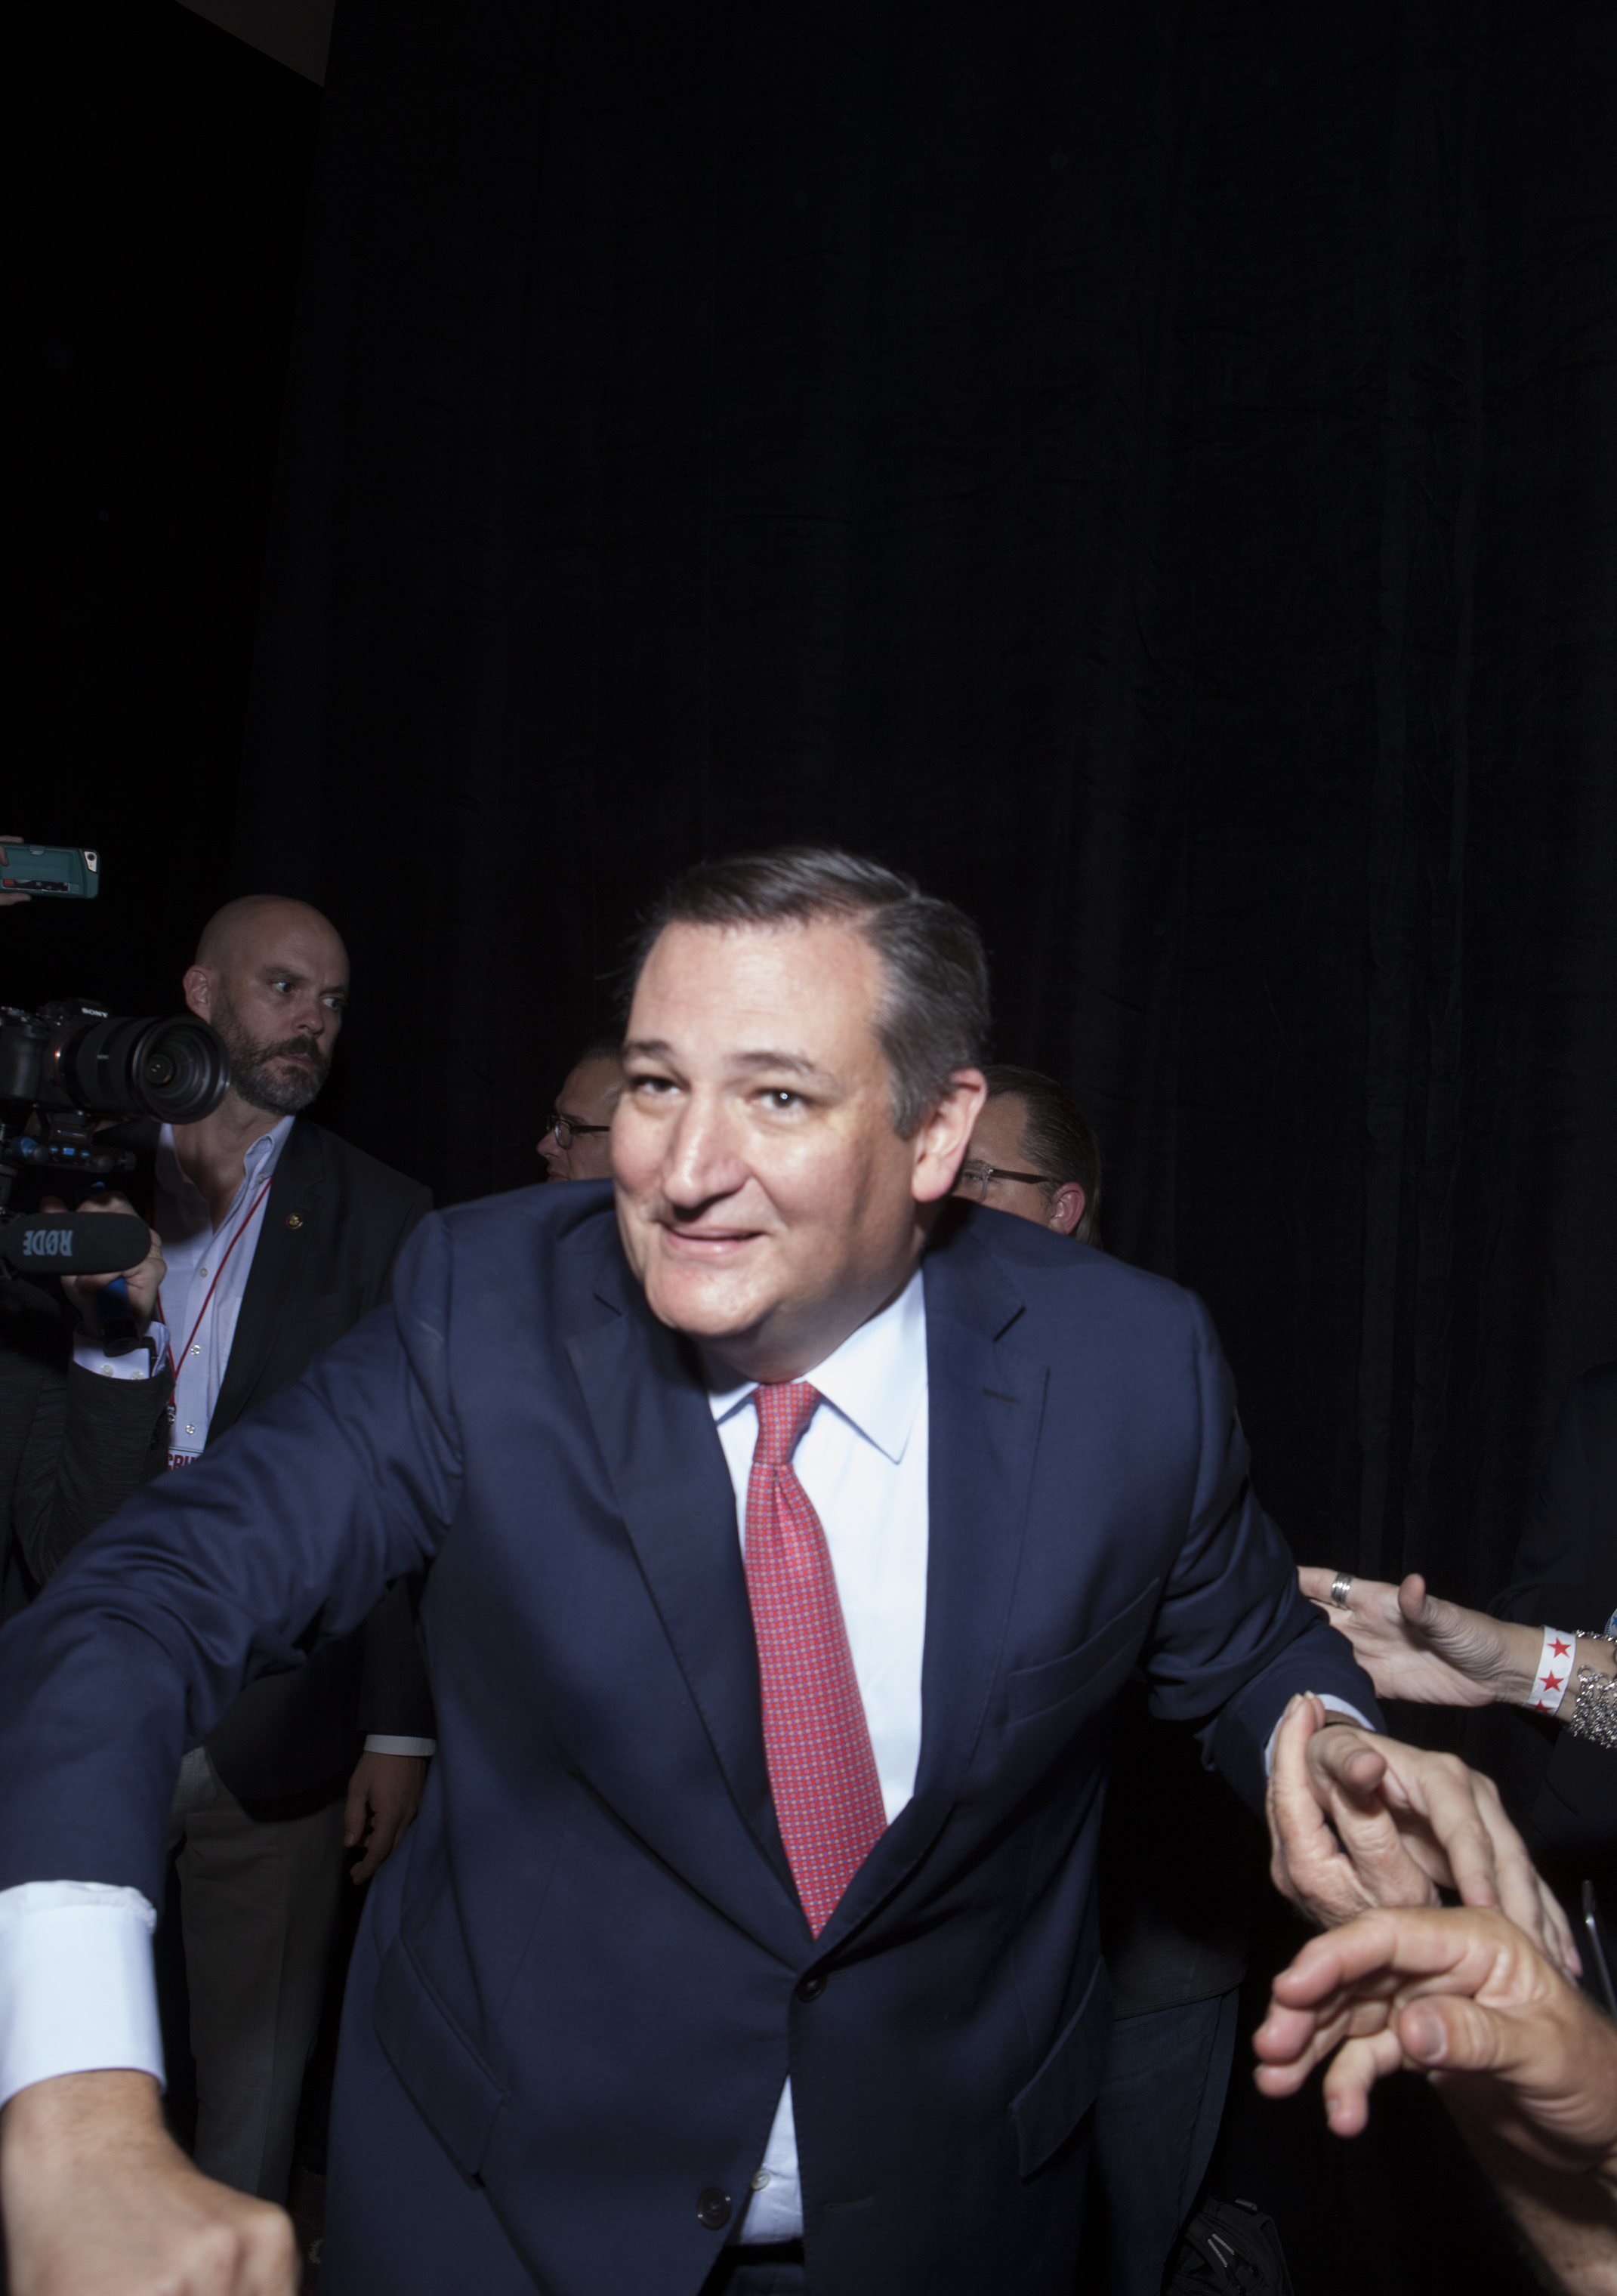 Sen. Ted Cruz after declaring victory at his Election Night event in Houston. (Brent Humphreys for TIME)